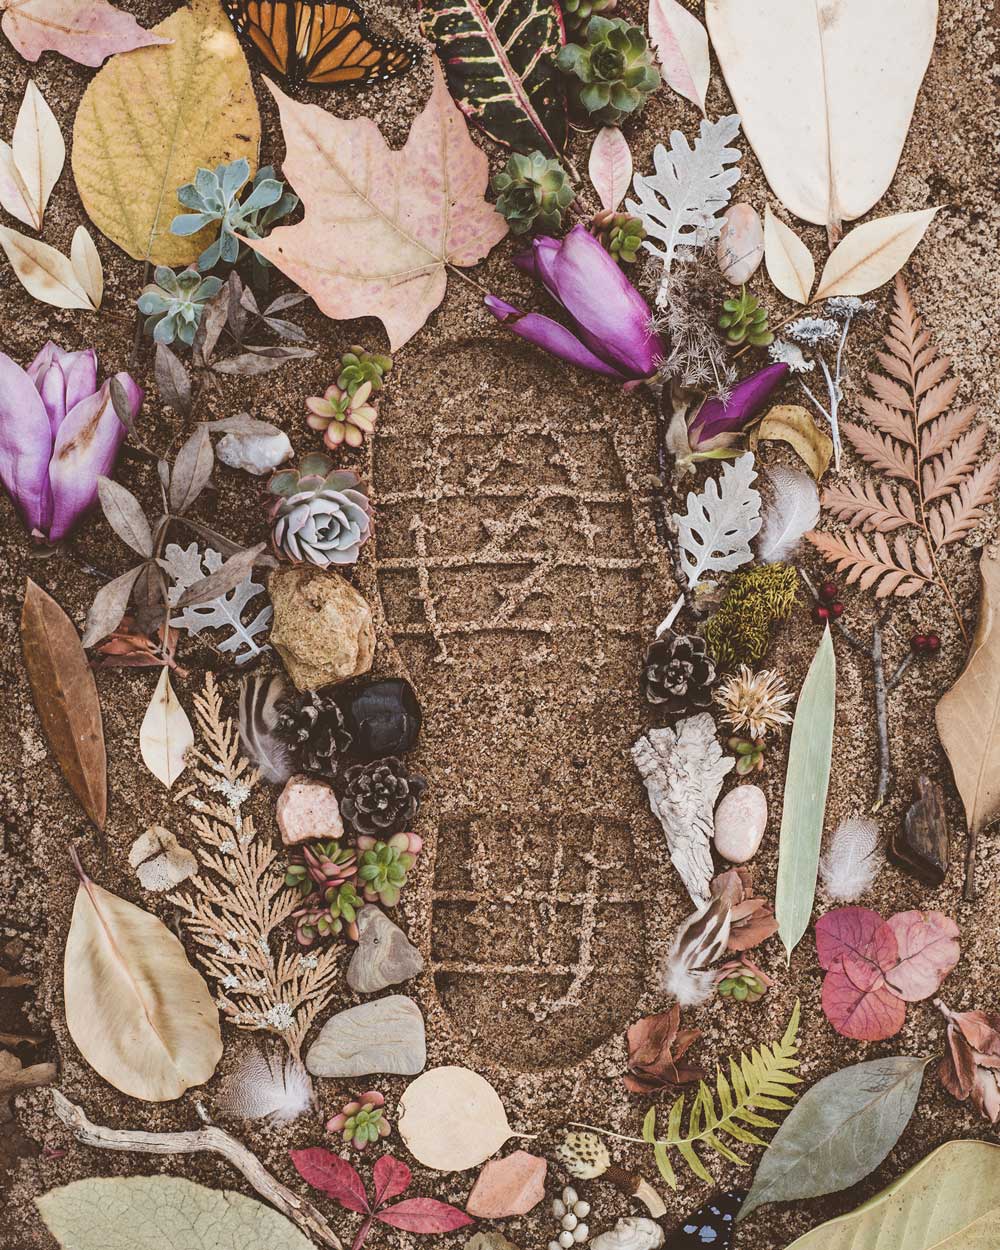 Footprint in the sand surrounded by flowers